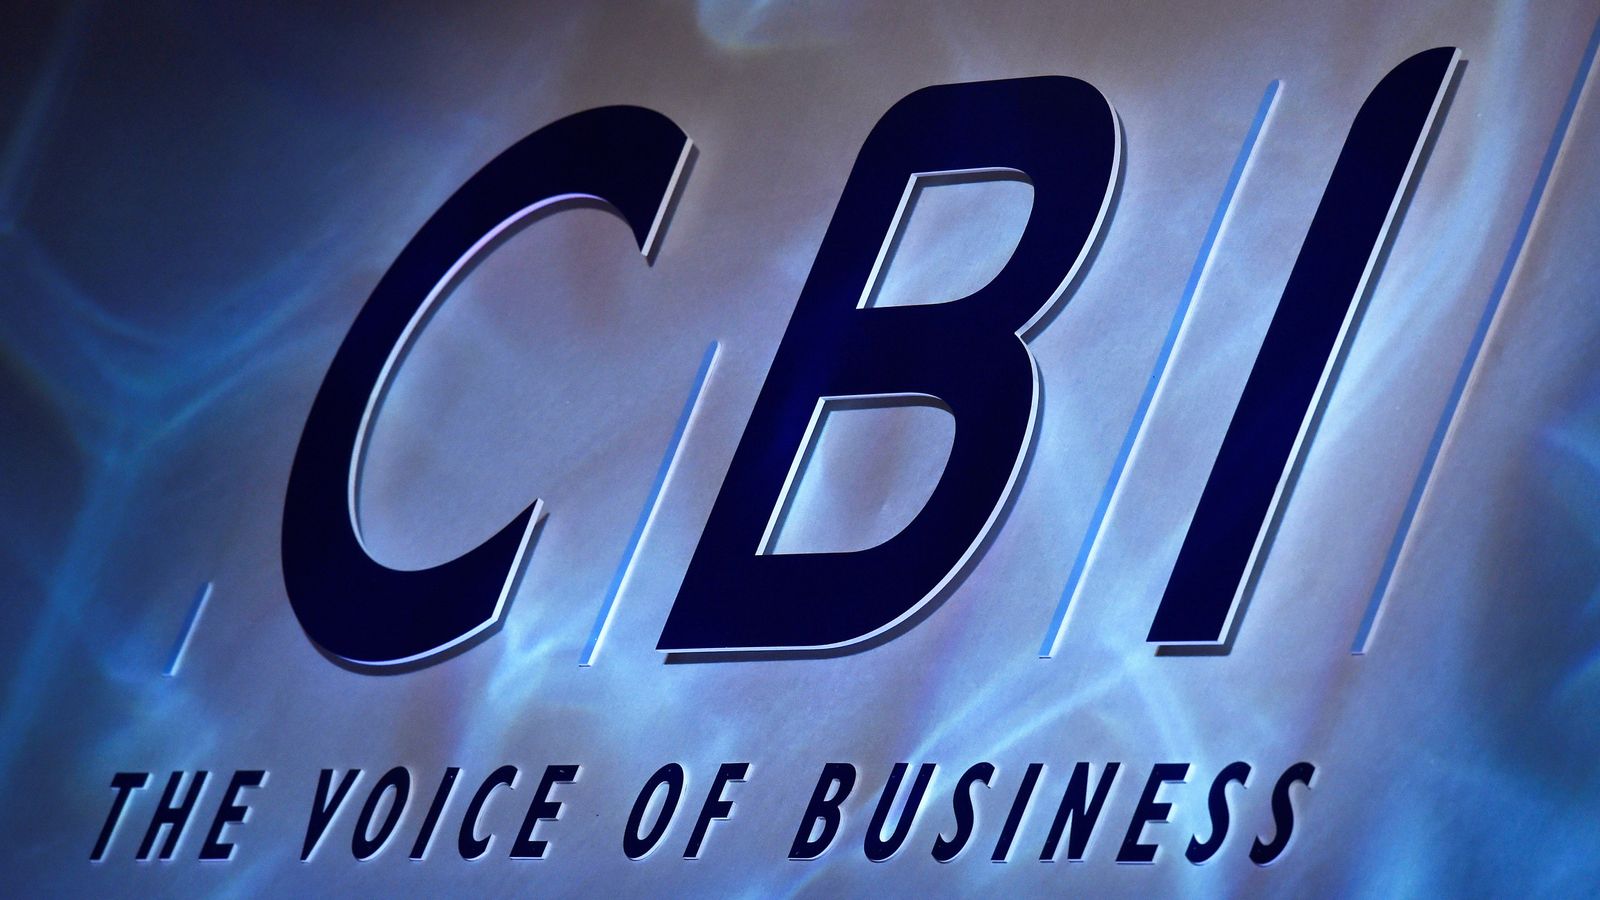 CBI hands new information to police after report of 'serious criminal offence'